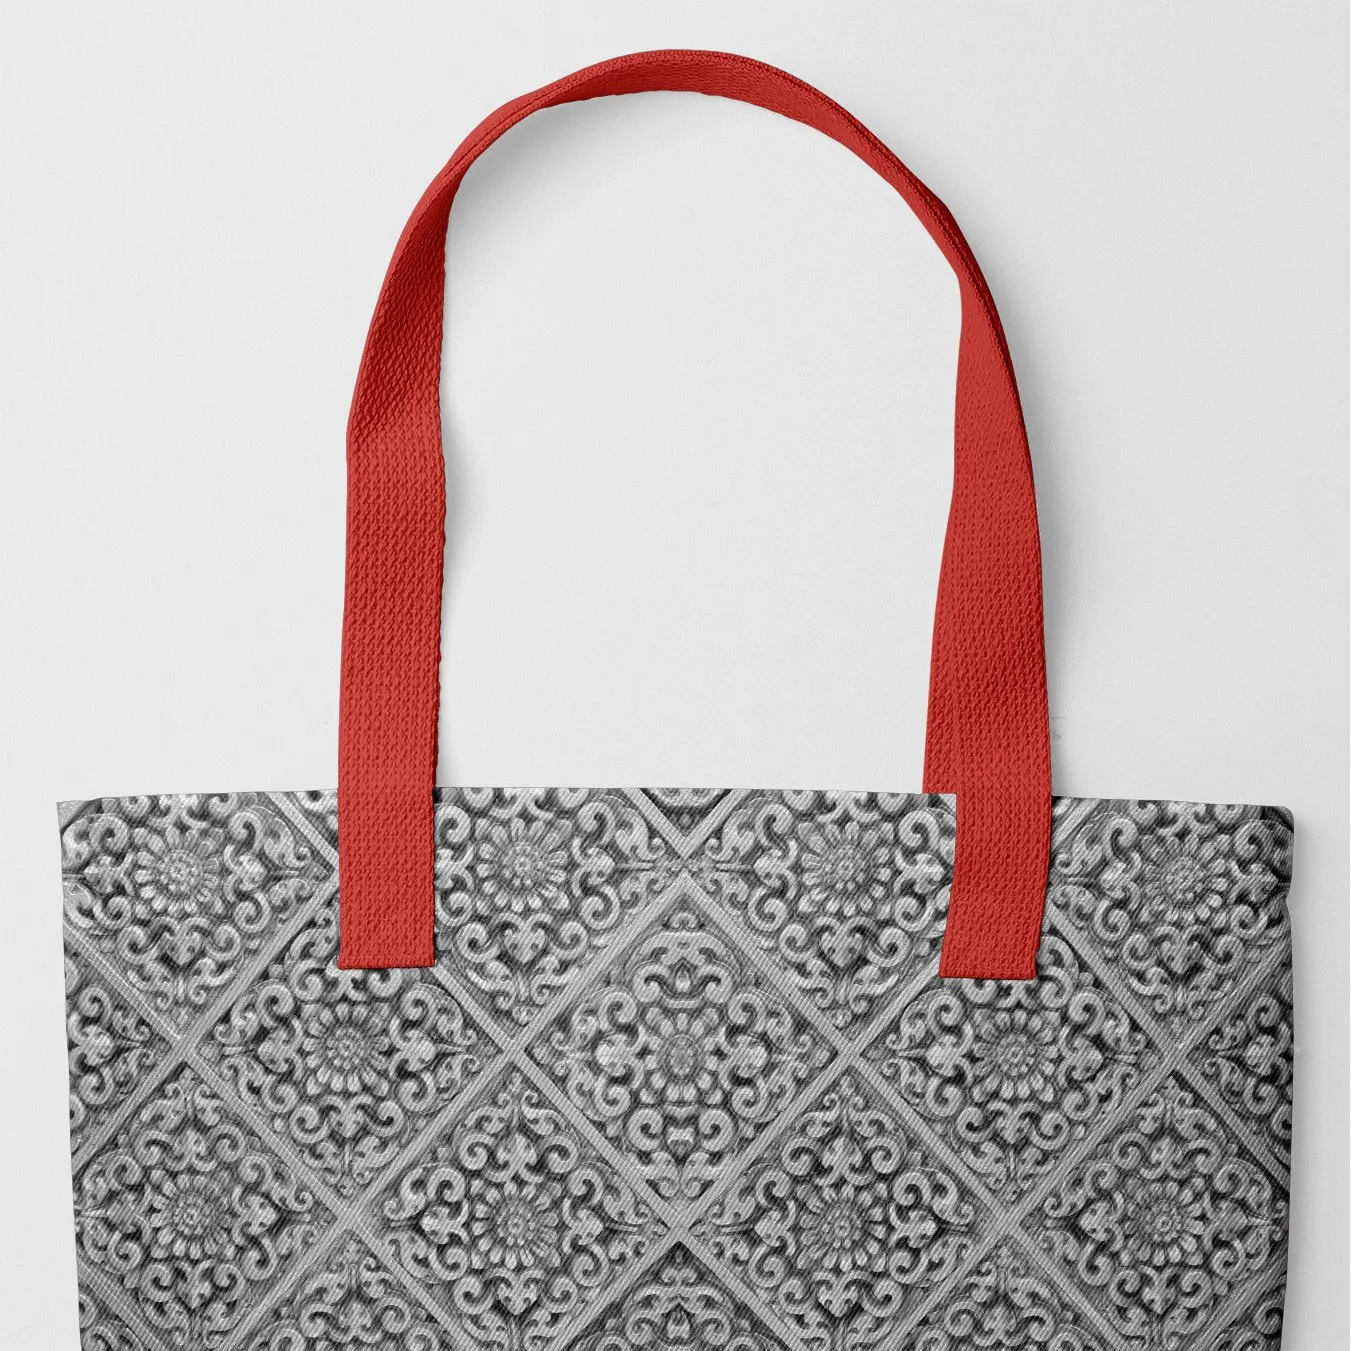 Flower Maze Tote - Black And White - Heavy Duty Reusable Grocery Bag - Red Handles - Shopping Totes - Aesthetic Art